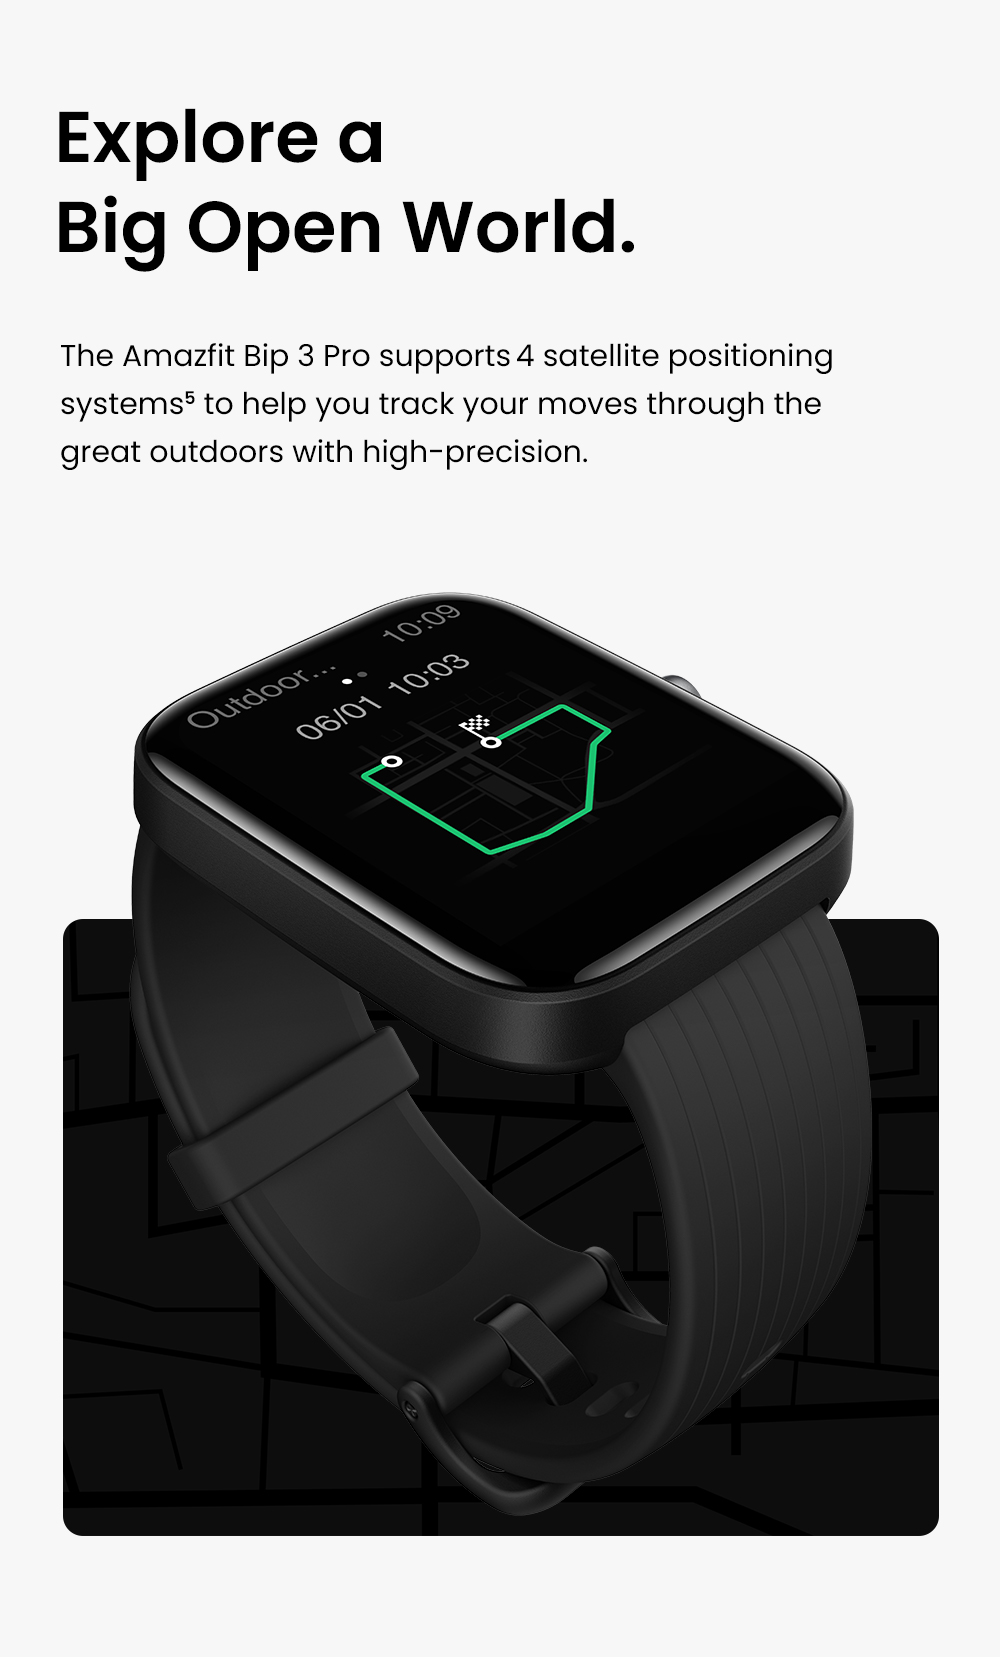 Amazfit Bip 3, Bip 3 Pro smartwatches launched in US, expected to